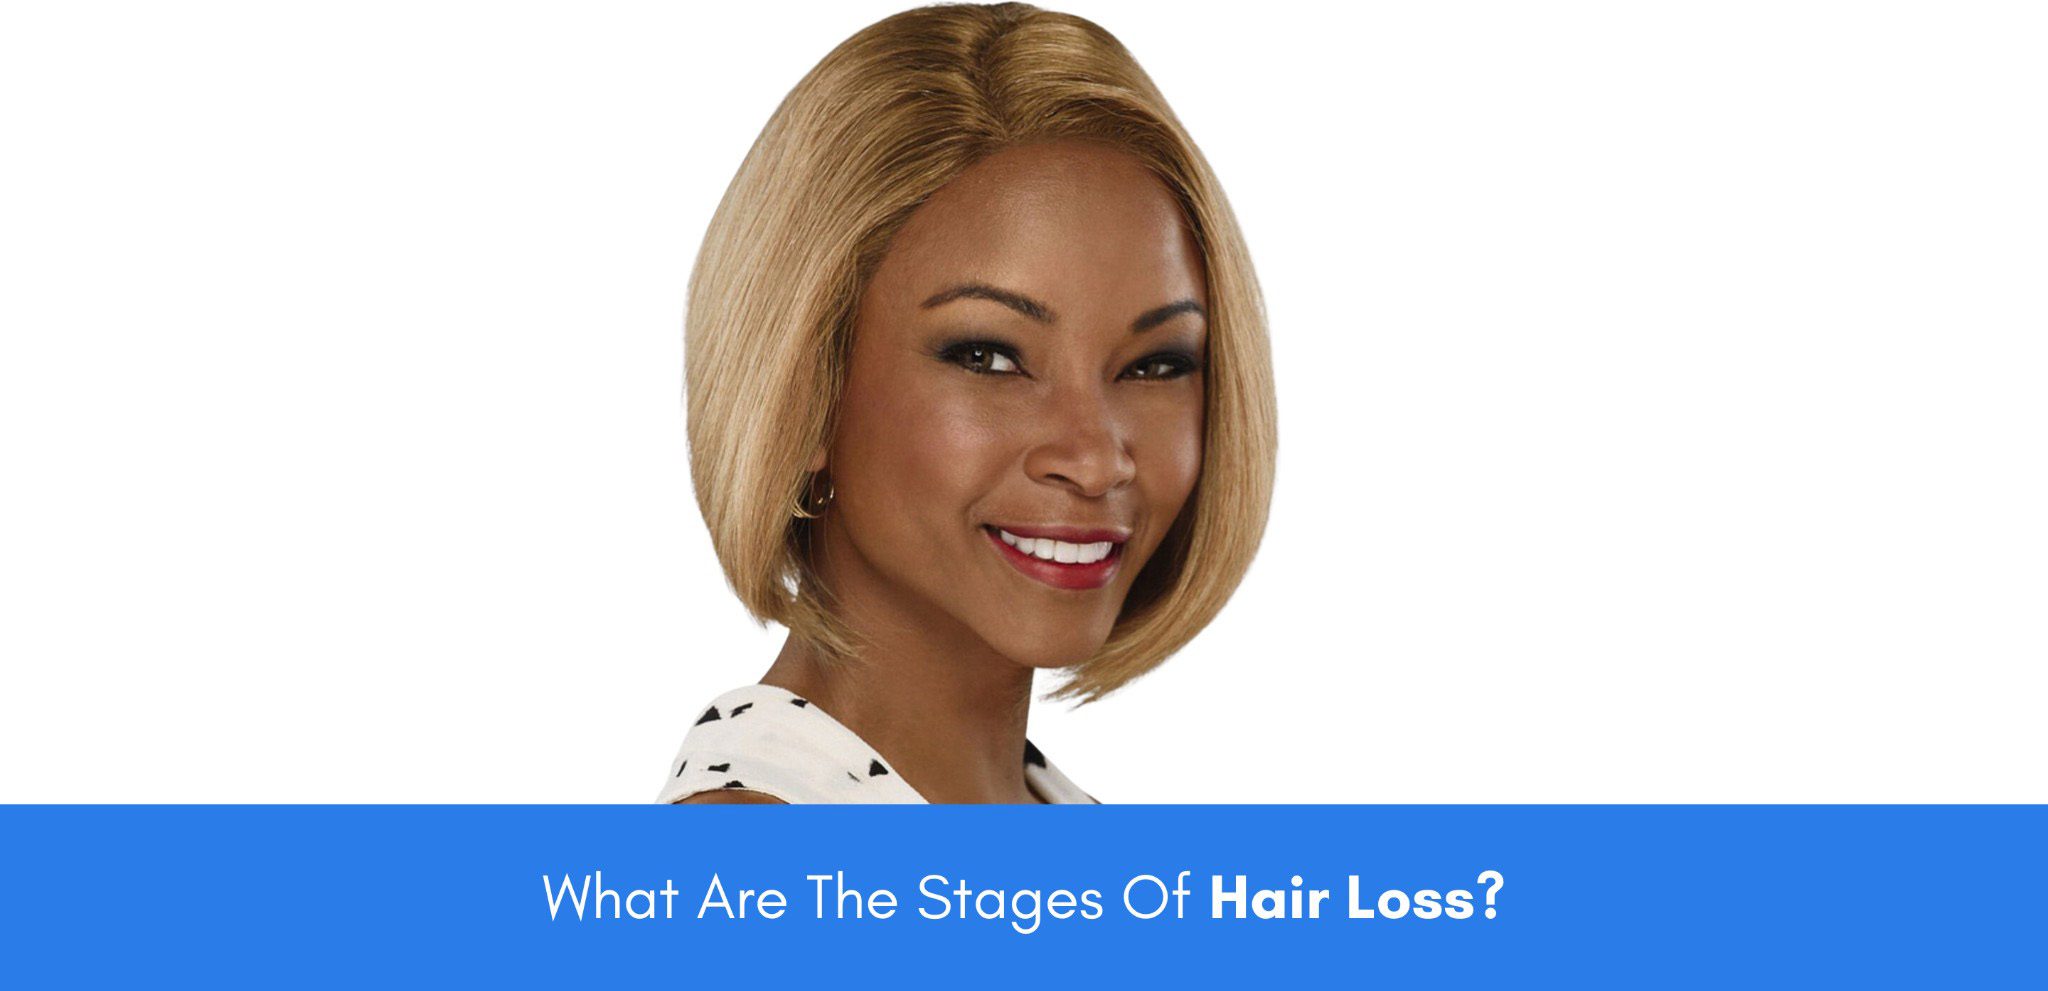 What Are The Stages Of Hair Loss?